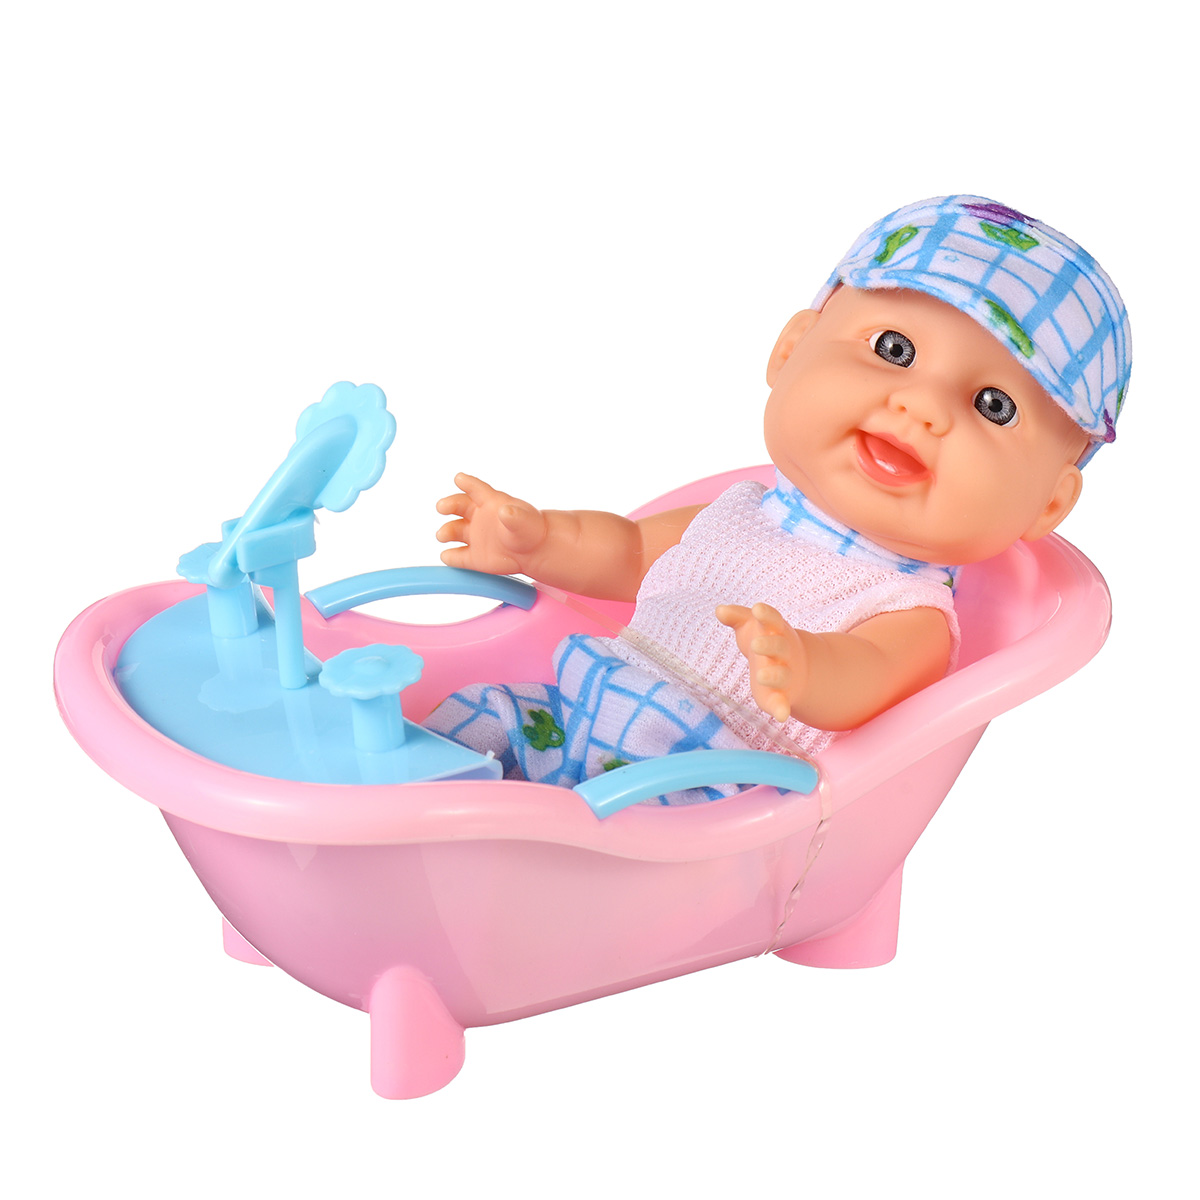 Simulation-Baby-3D-Creative-Cute-Doll-Play-House-Toy-Doll-Vinyl-Doll-Gift-1818656-19